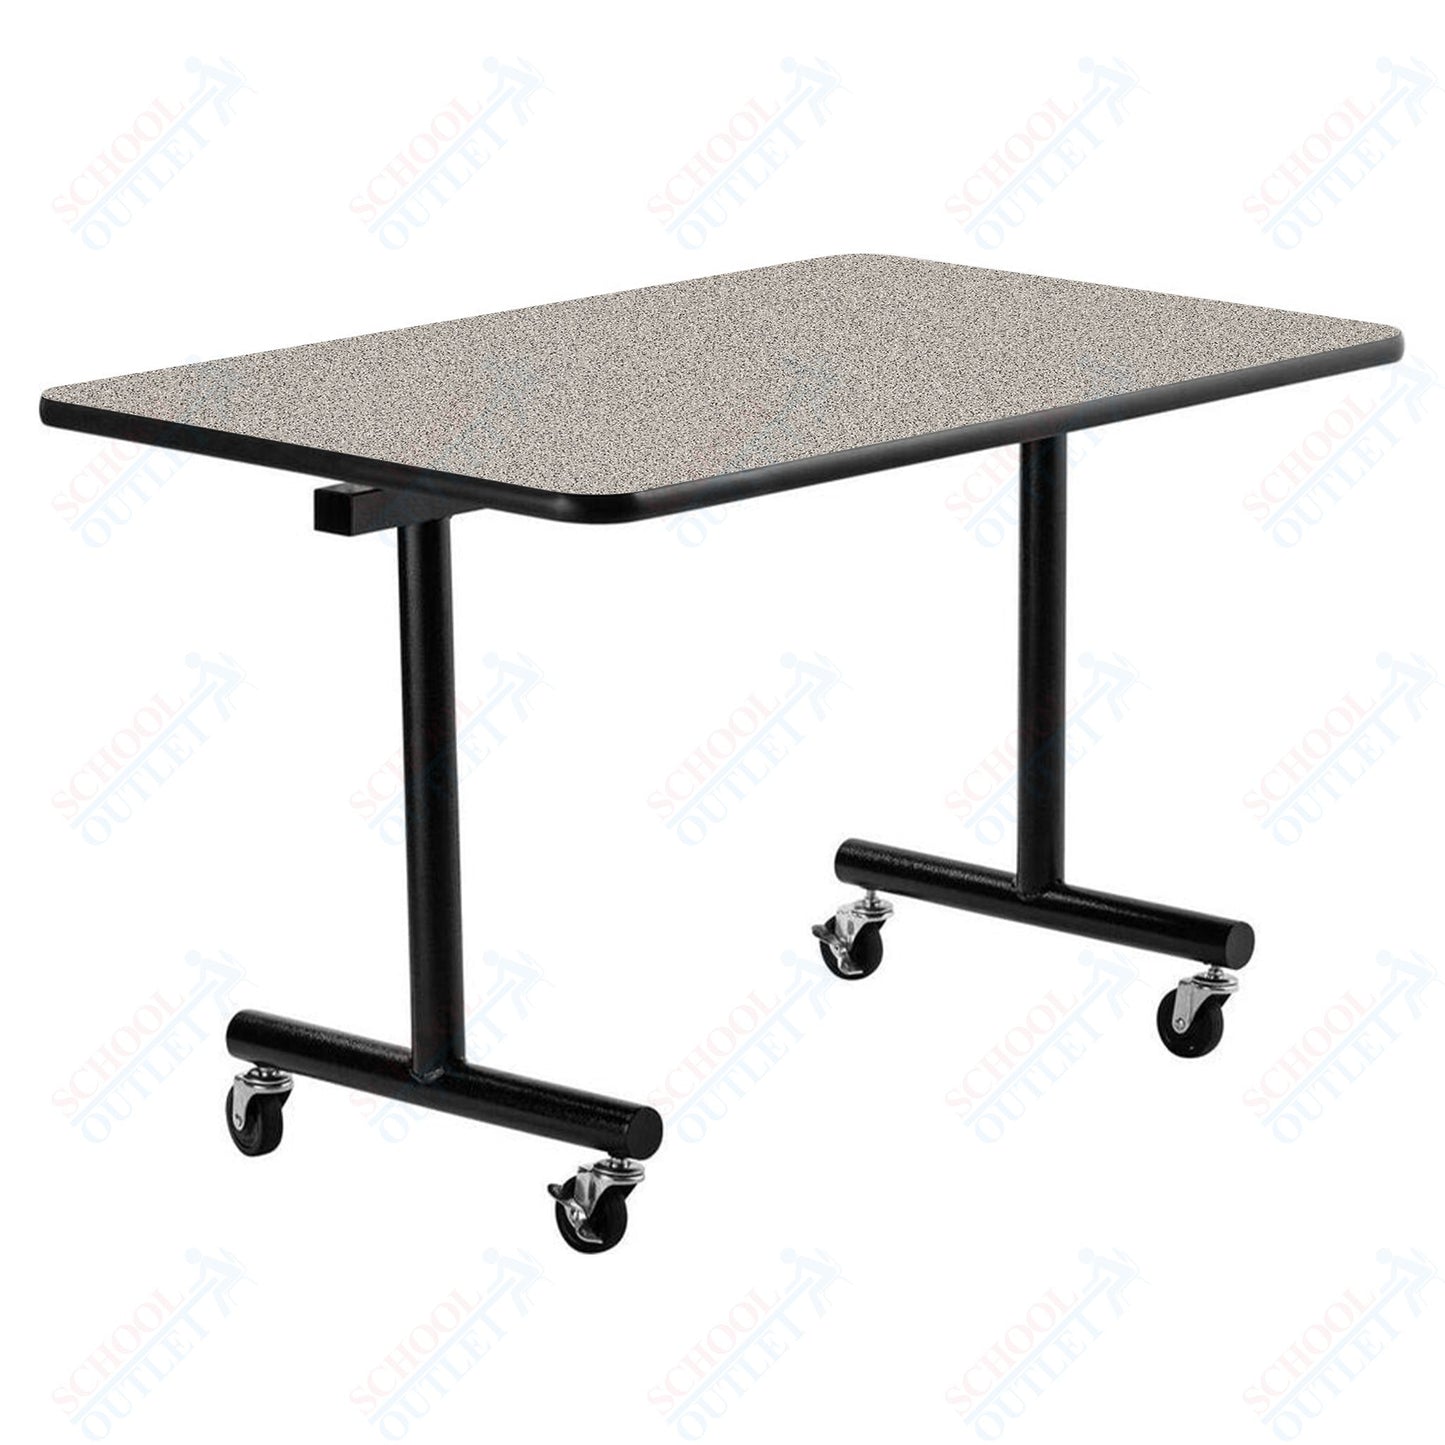 NPS ToGo Table, 30"x60", Particleboard Core (NationalPublic Seating NPS-TGT3060PBTM)